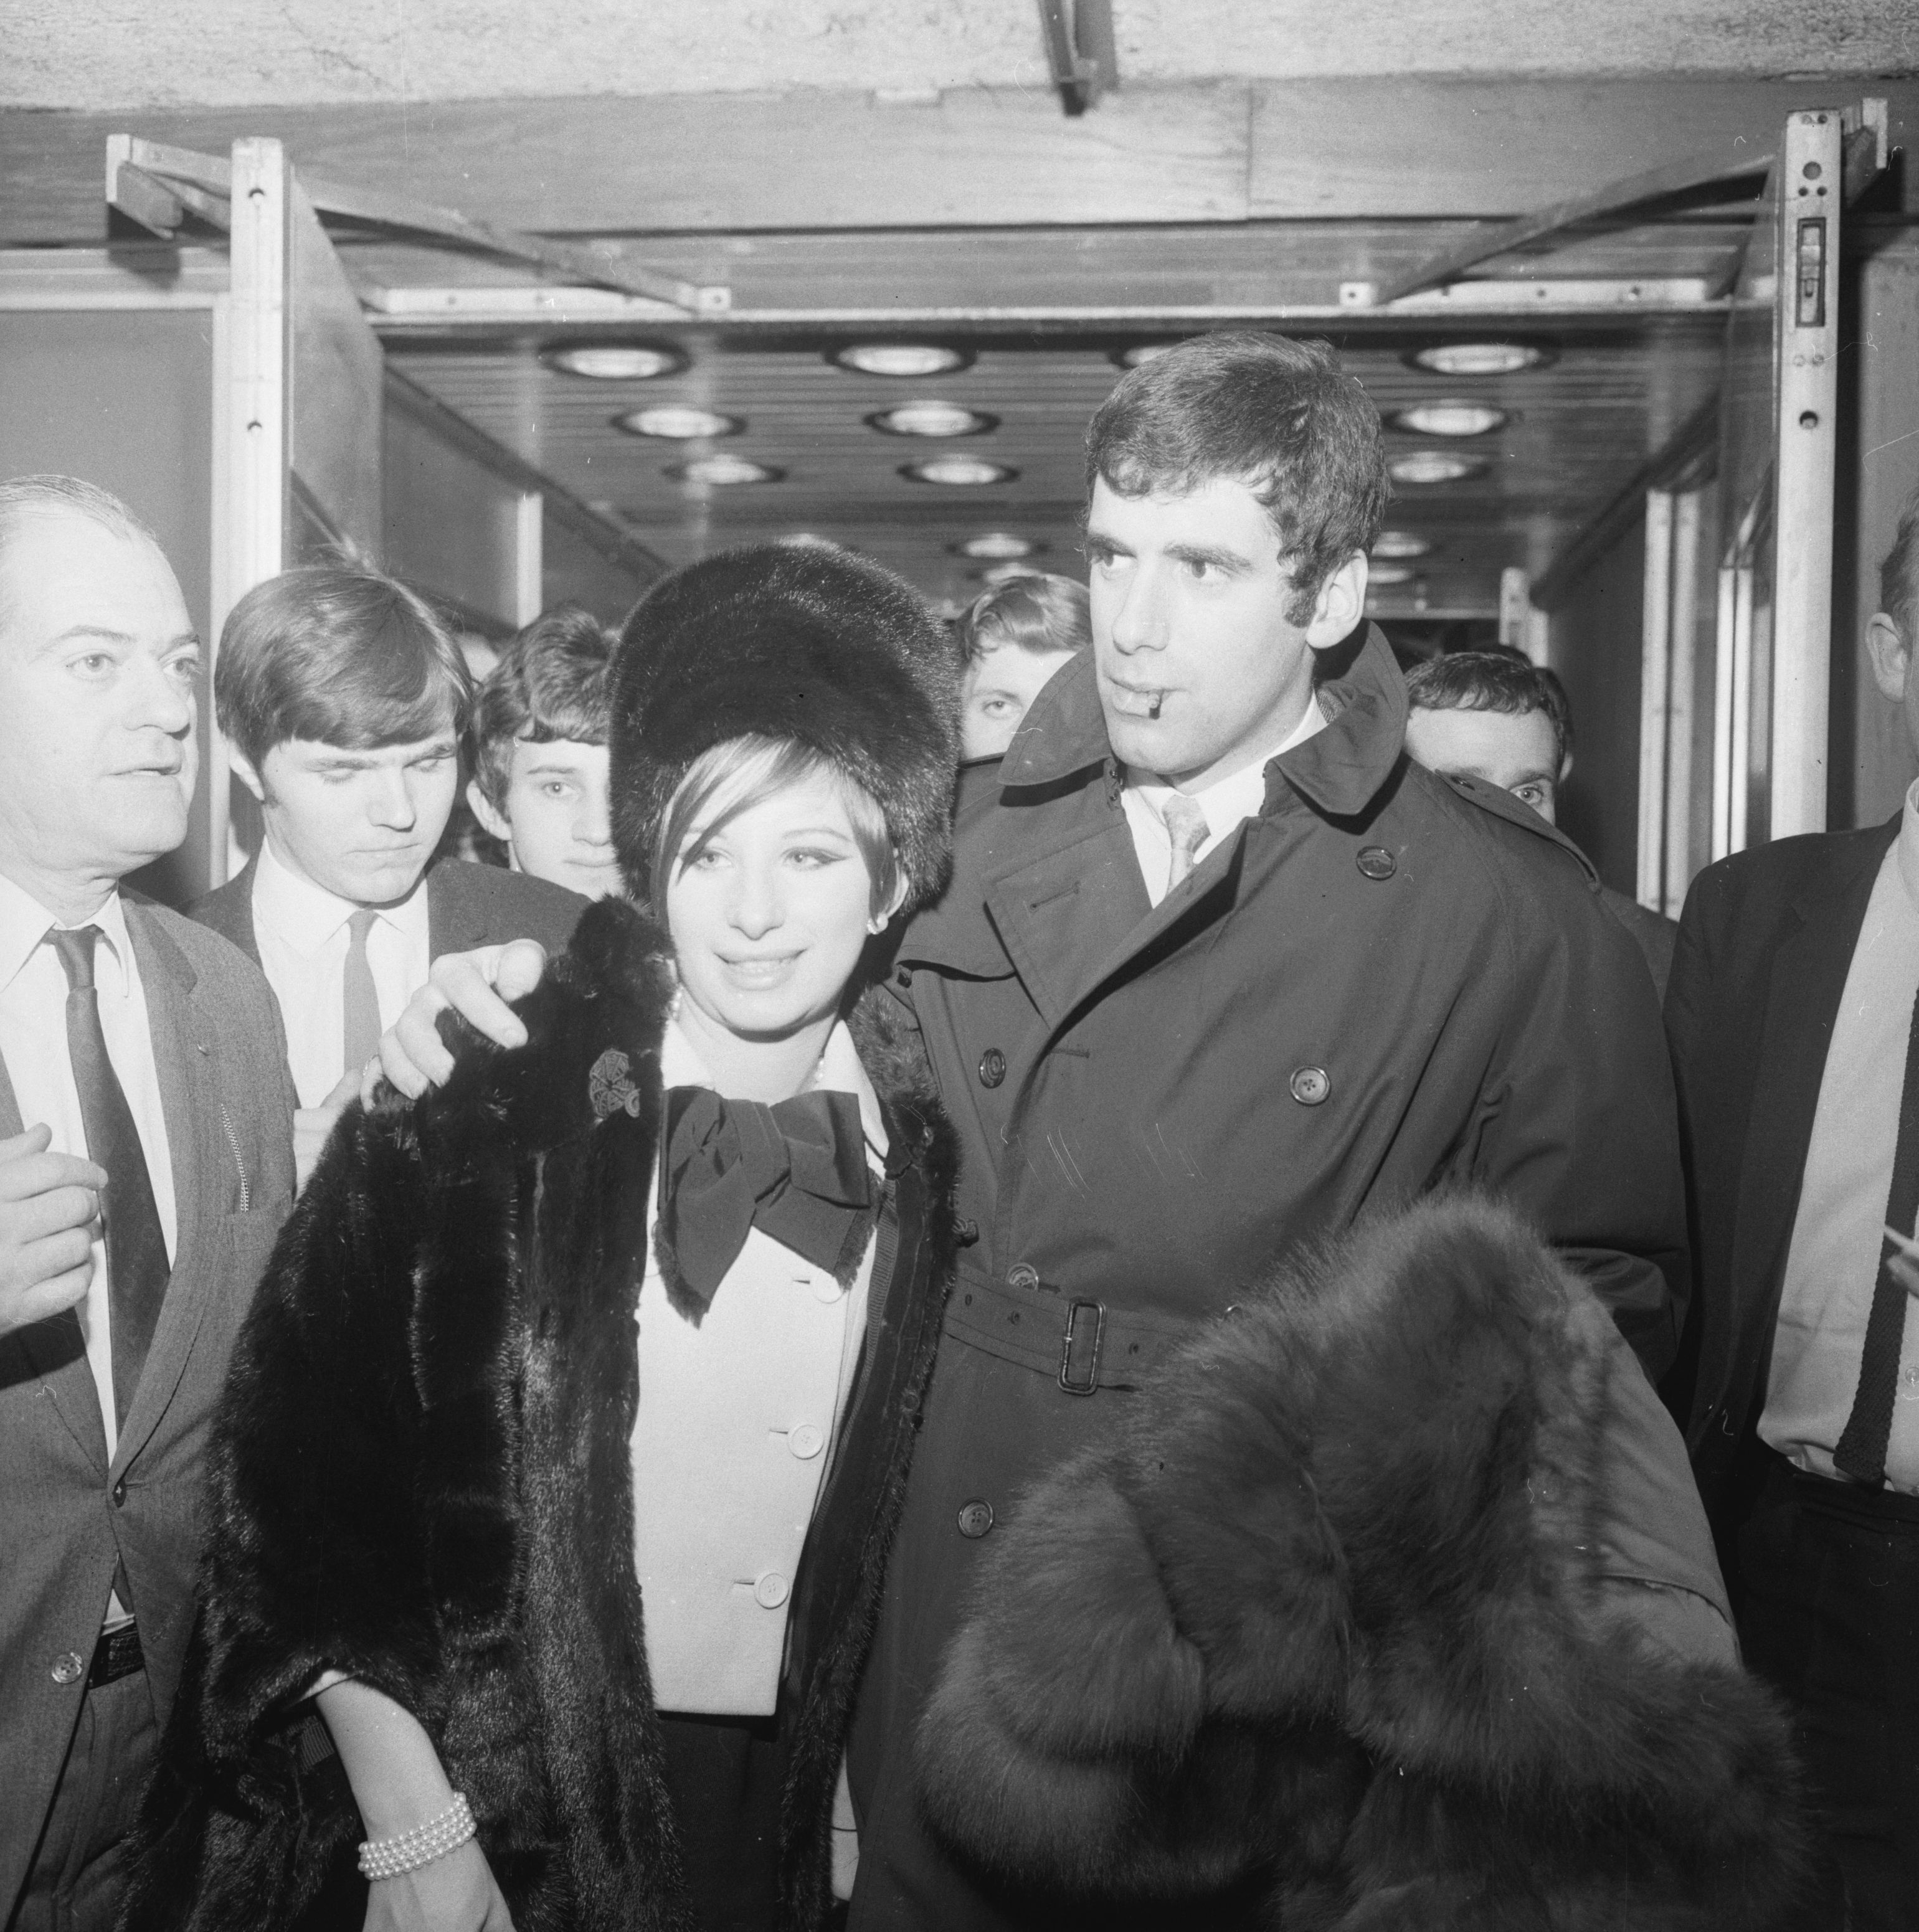 Barbra Streisand arrives at London Airport with her husband Elliott Gould. | Source: Getty Images